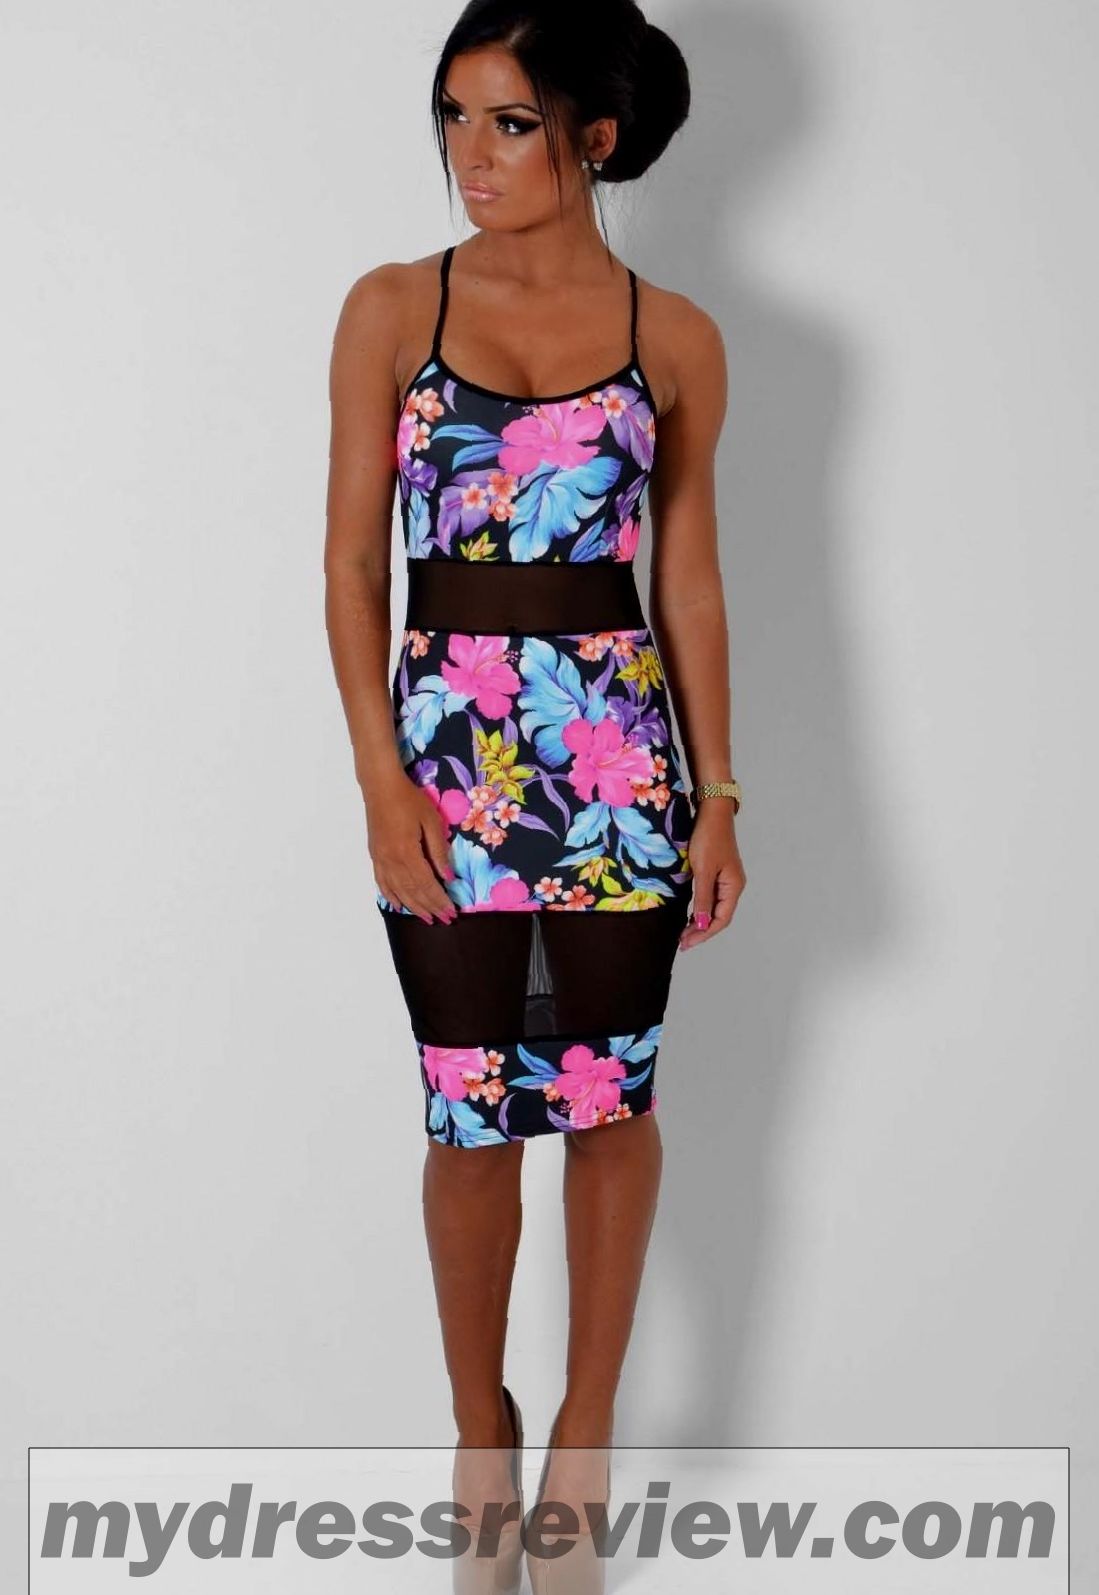 Red Floral Bodycon Dress And New Fashion Collection